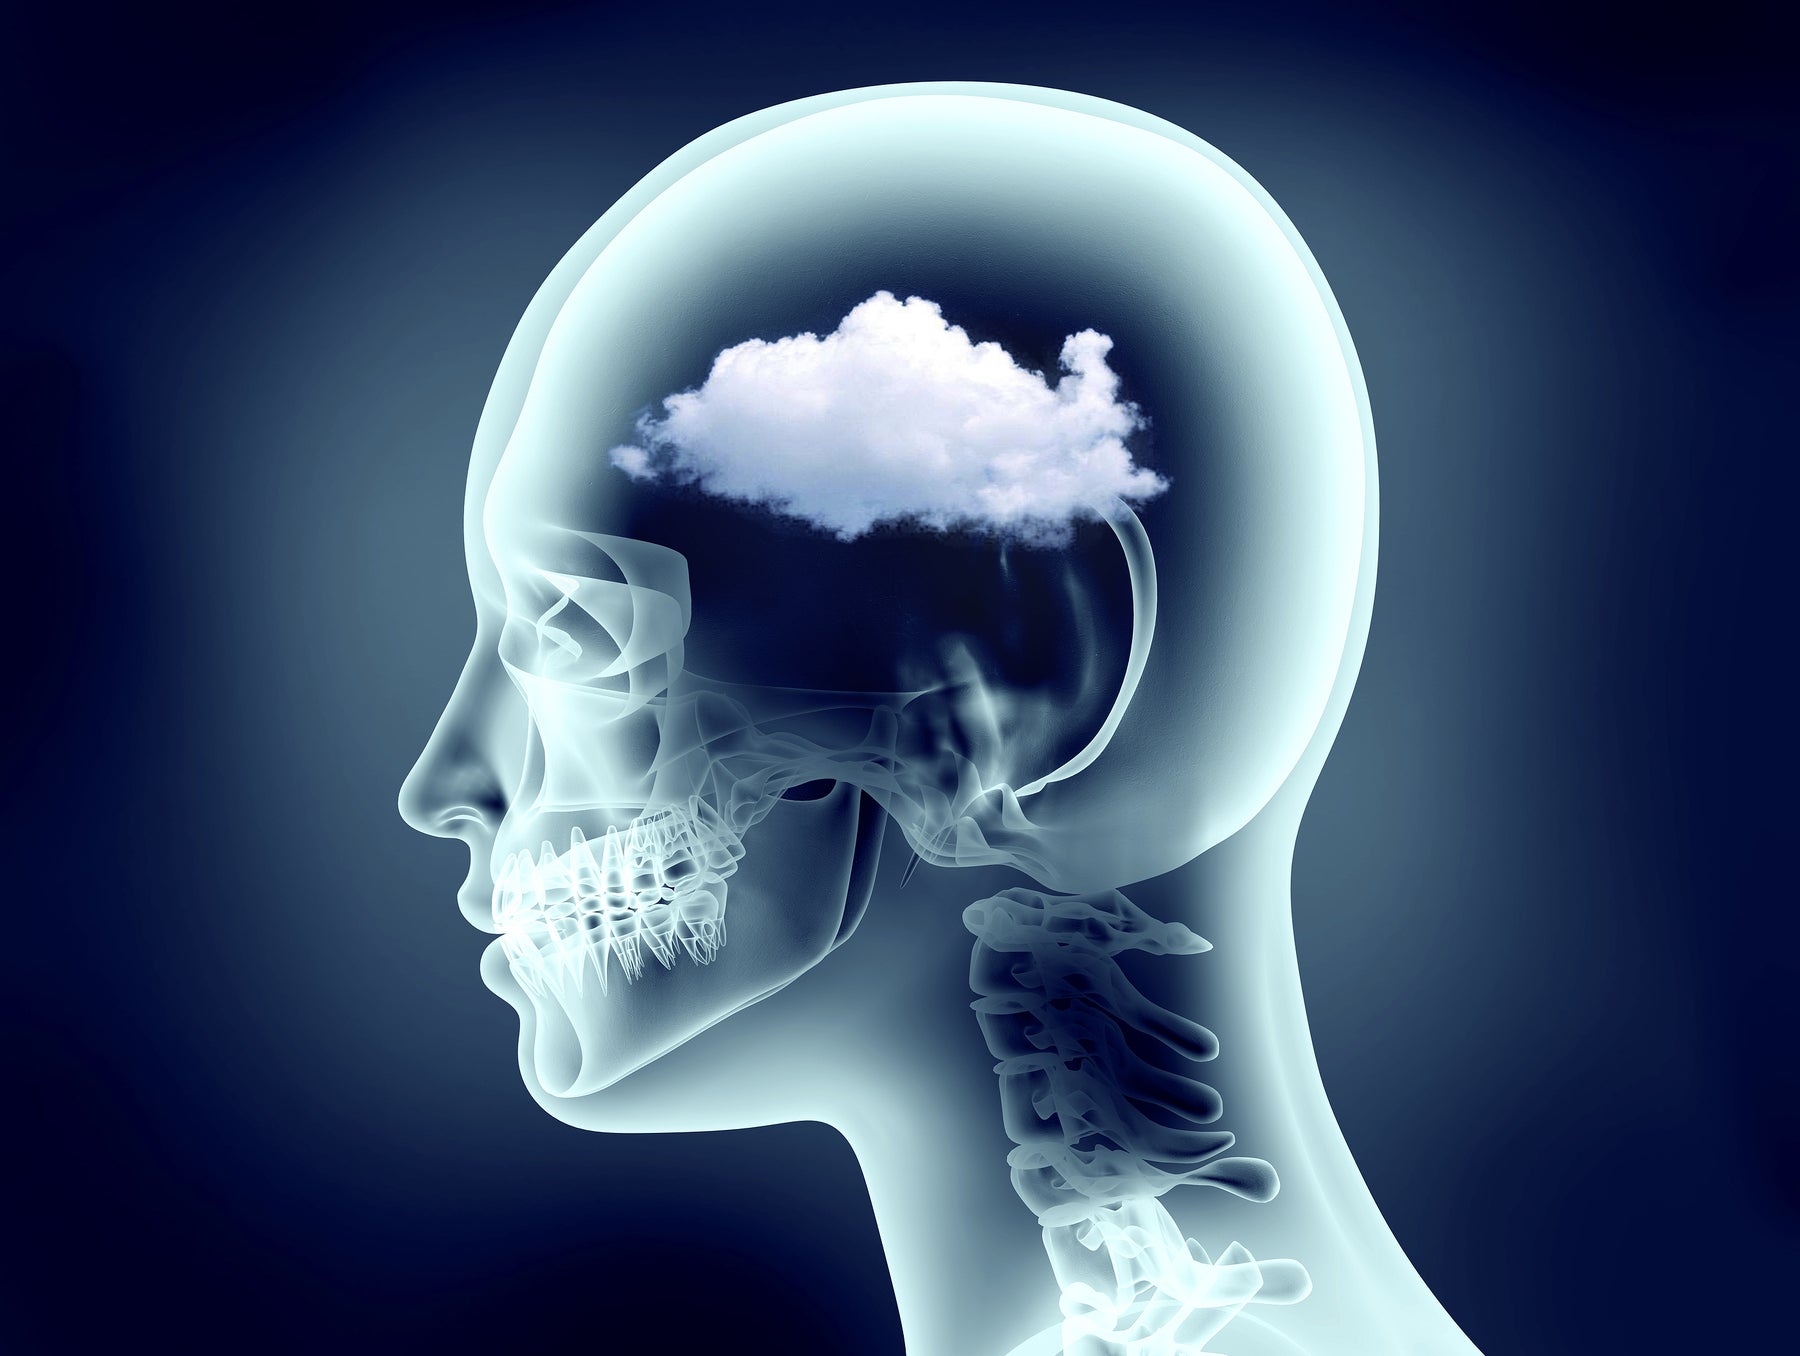 Brain Fog: How to Fix It & What Lifestyle Choices Lead to It